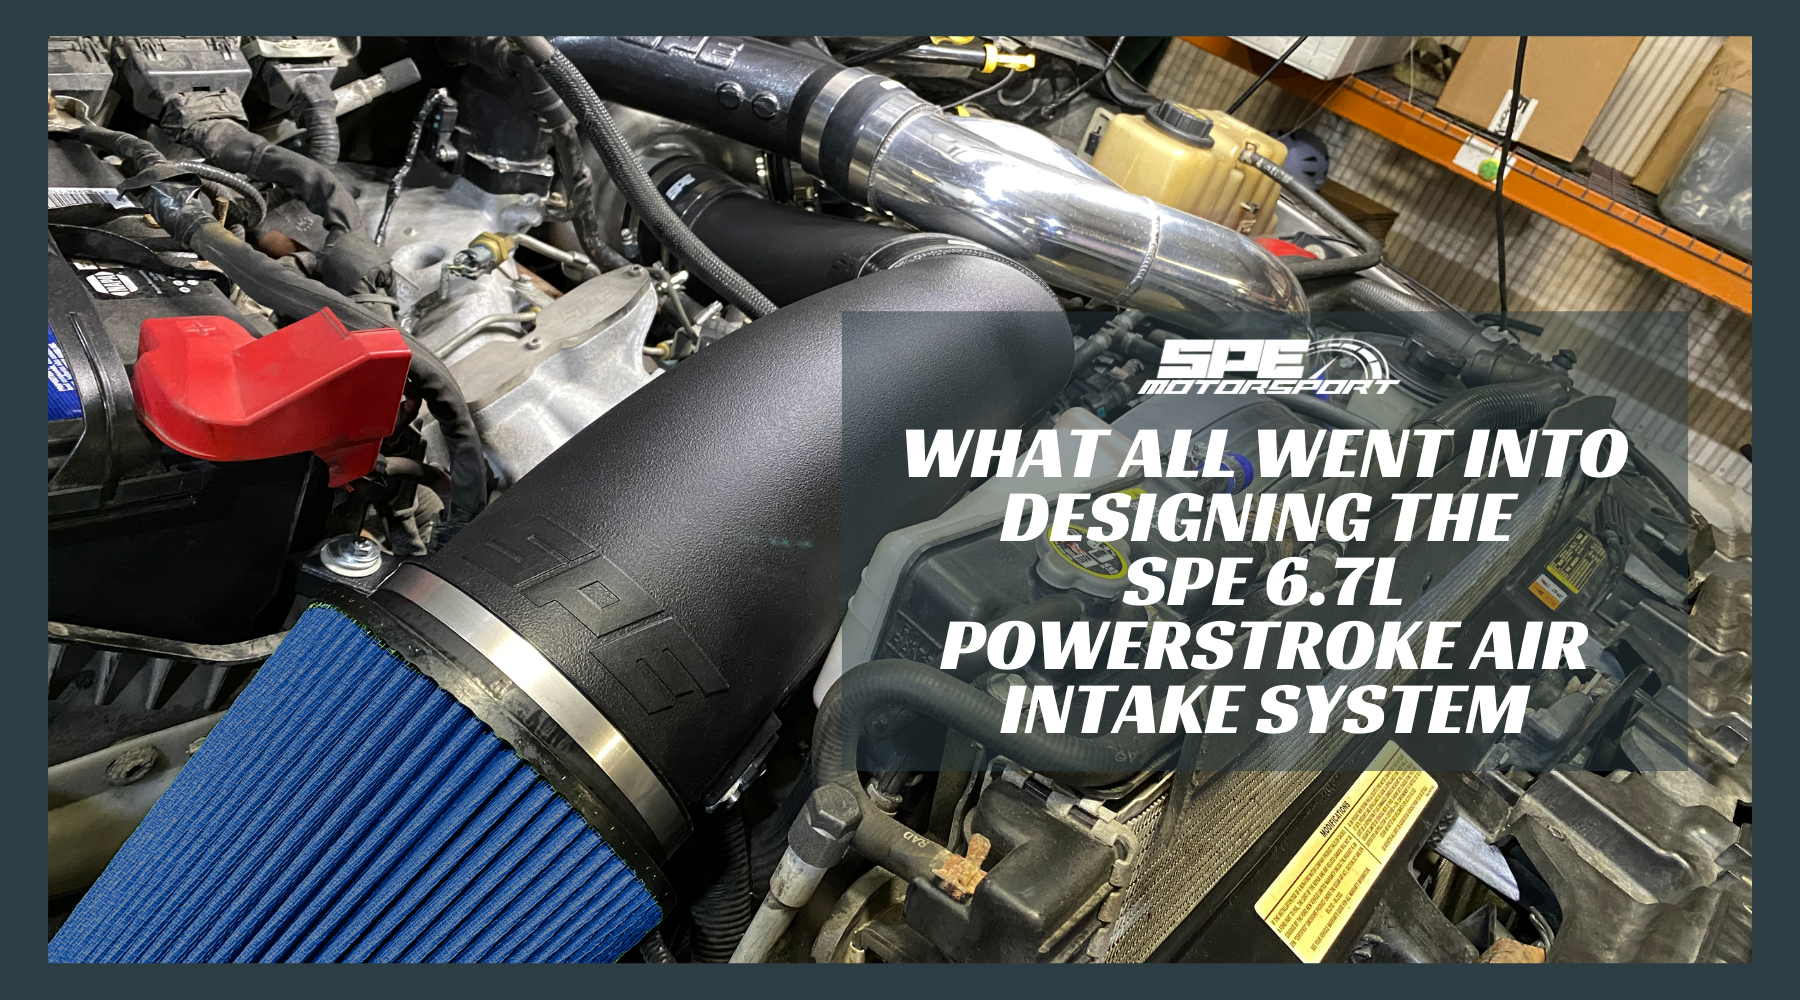 What All Went Into Designing the SPE 6.7L Powerstroke Air Intake System